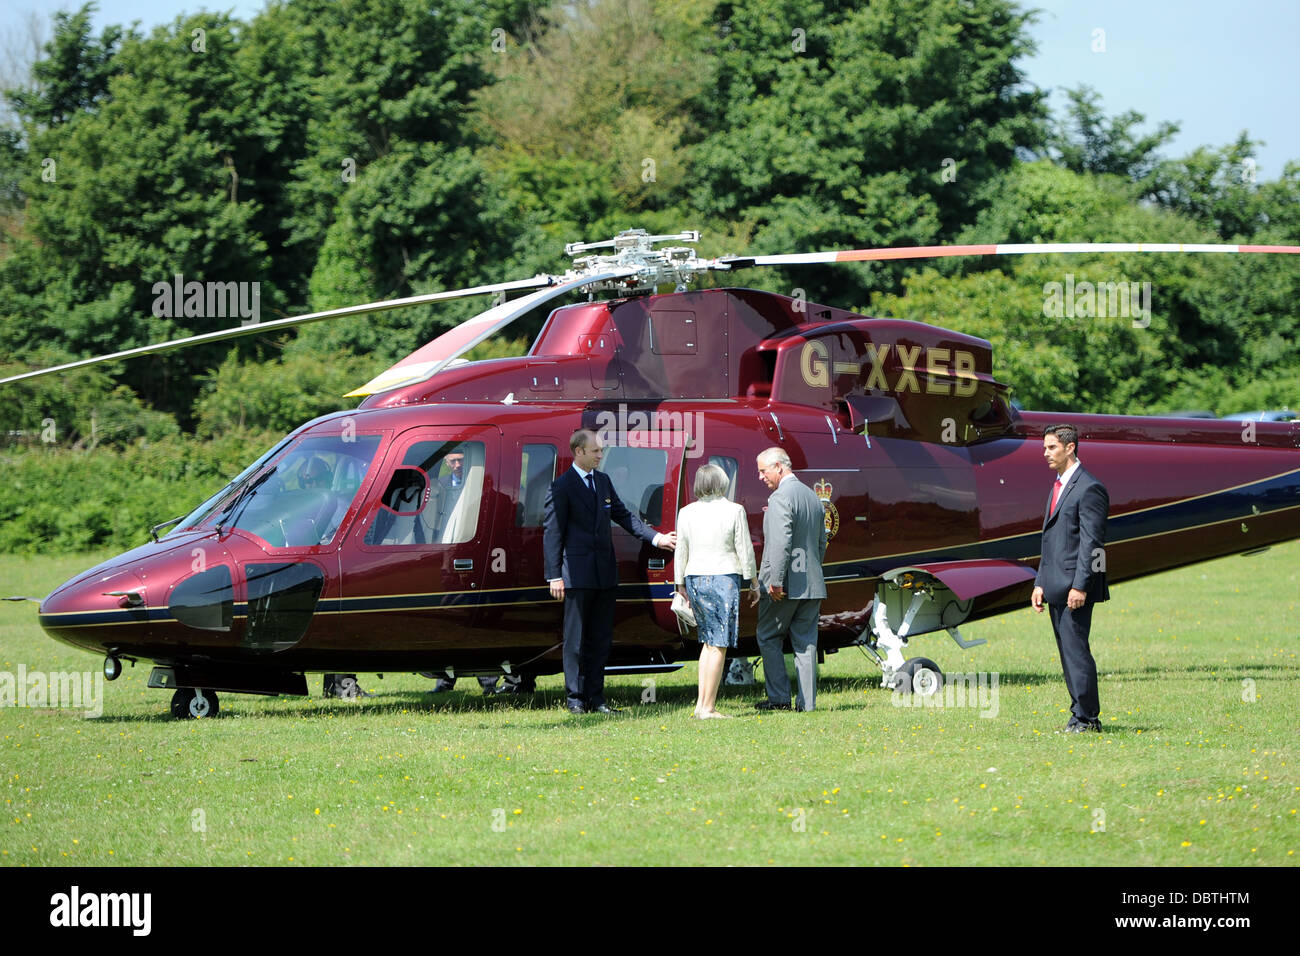 The royal family's helicopter also known as the Queen's Helicopter Flight (TQHF) Sikorsky G-XXEA Stock Photo